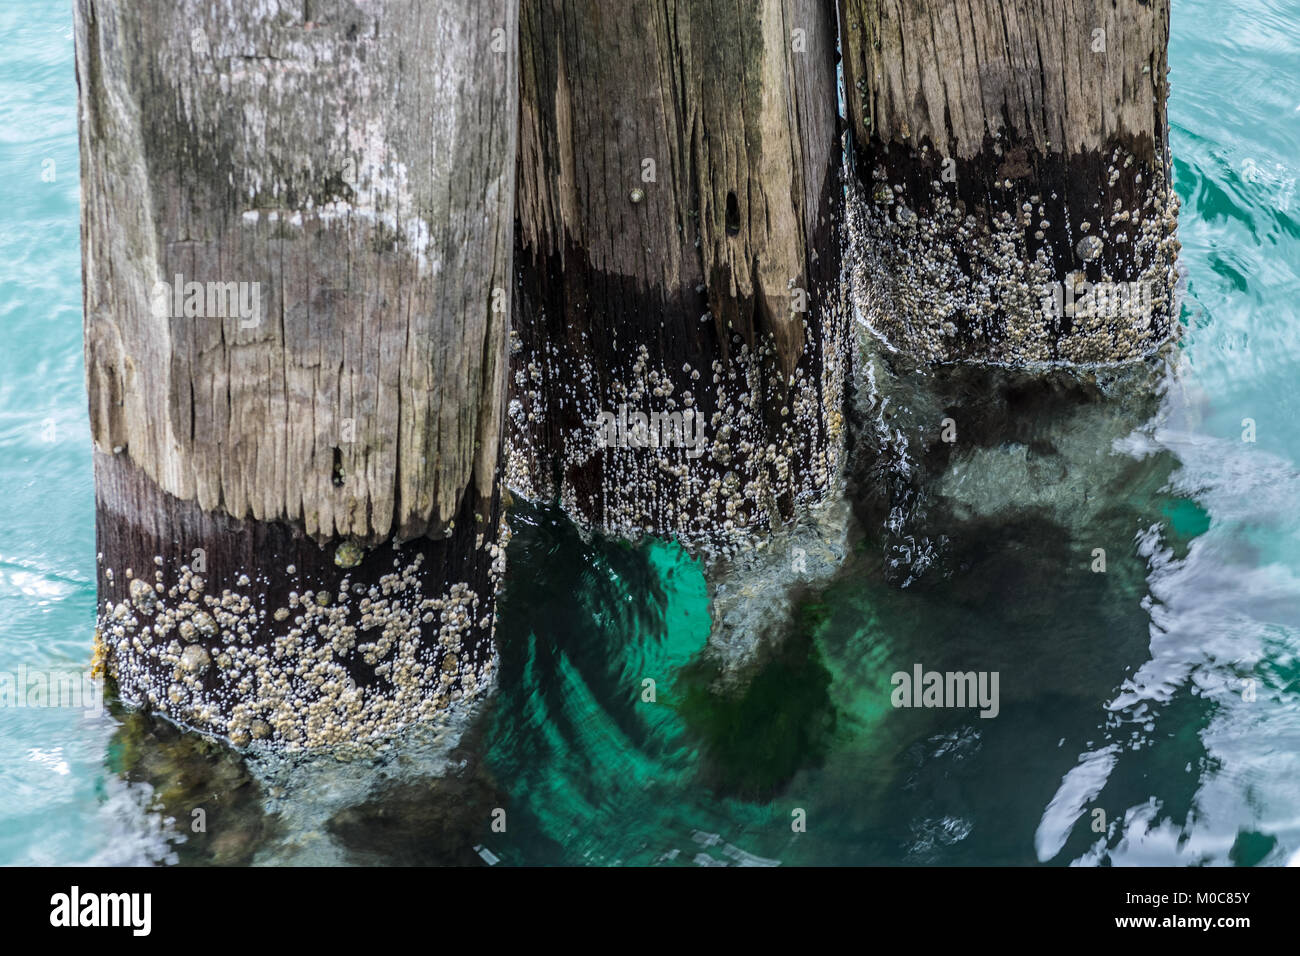 This image was taken from Swanage Pier, Dorset looking down onto three dis-used wooden support piles. Stock Photo